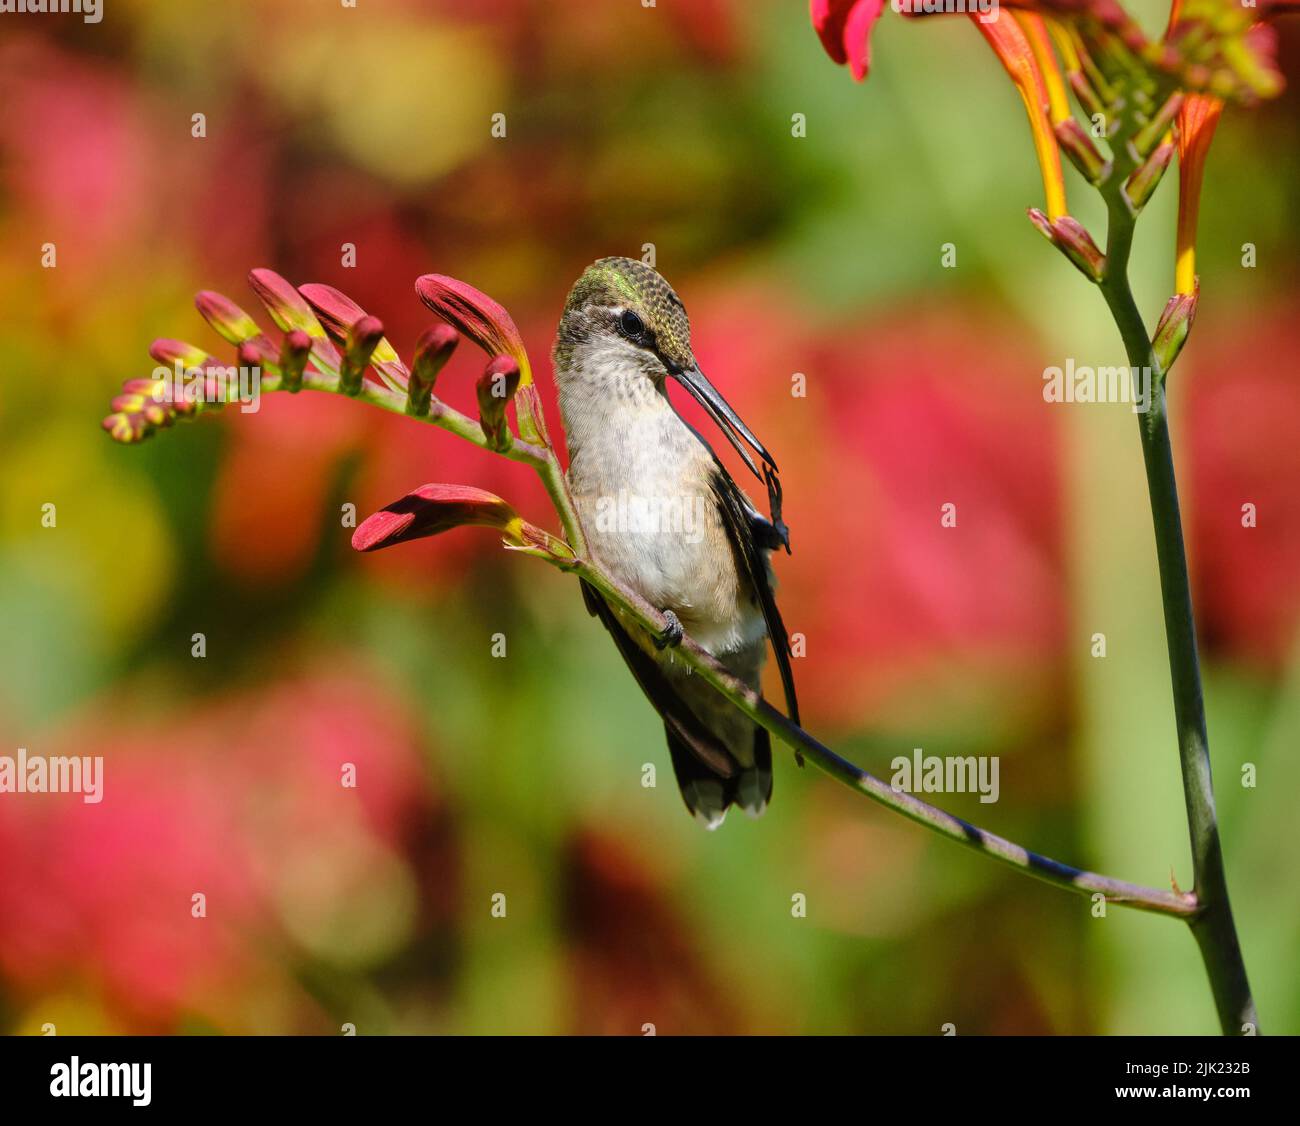 a juvenile Ruby-throated Hummingbird, Archilochus colubris, perched on a red crocosmia flower Stock Photo